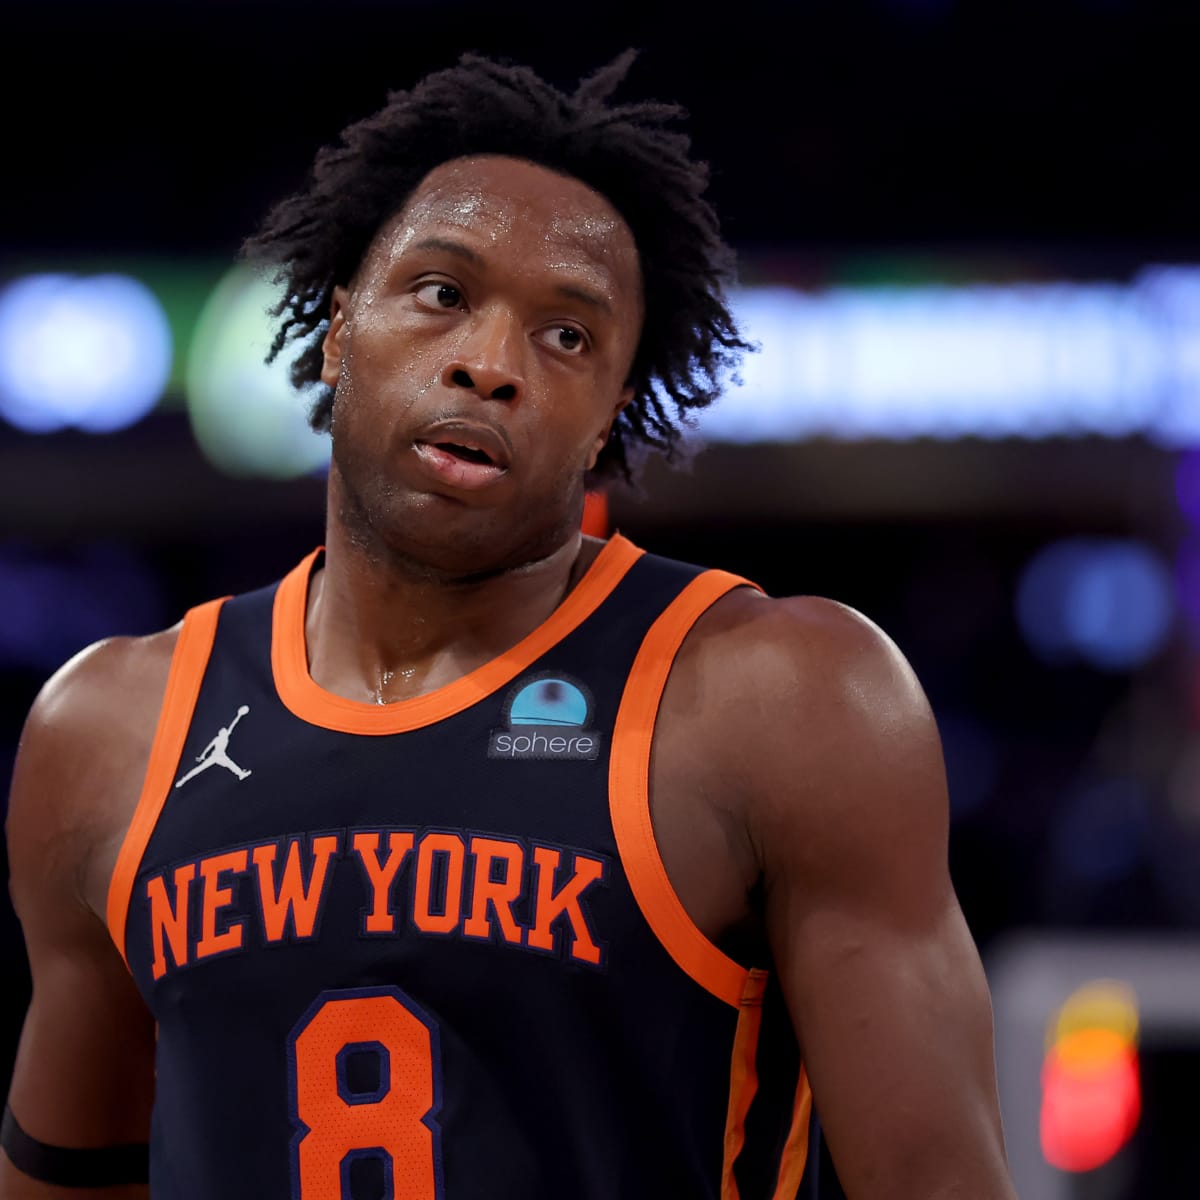 Knicks appear to operate more smoothly after picking up OG Anunoby